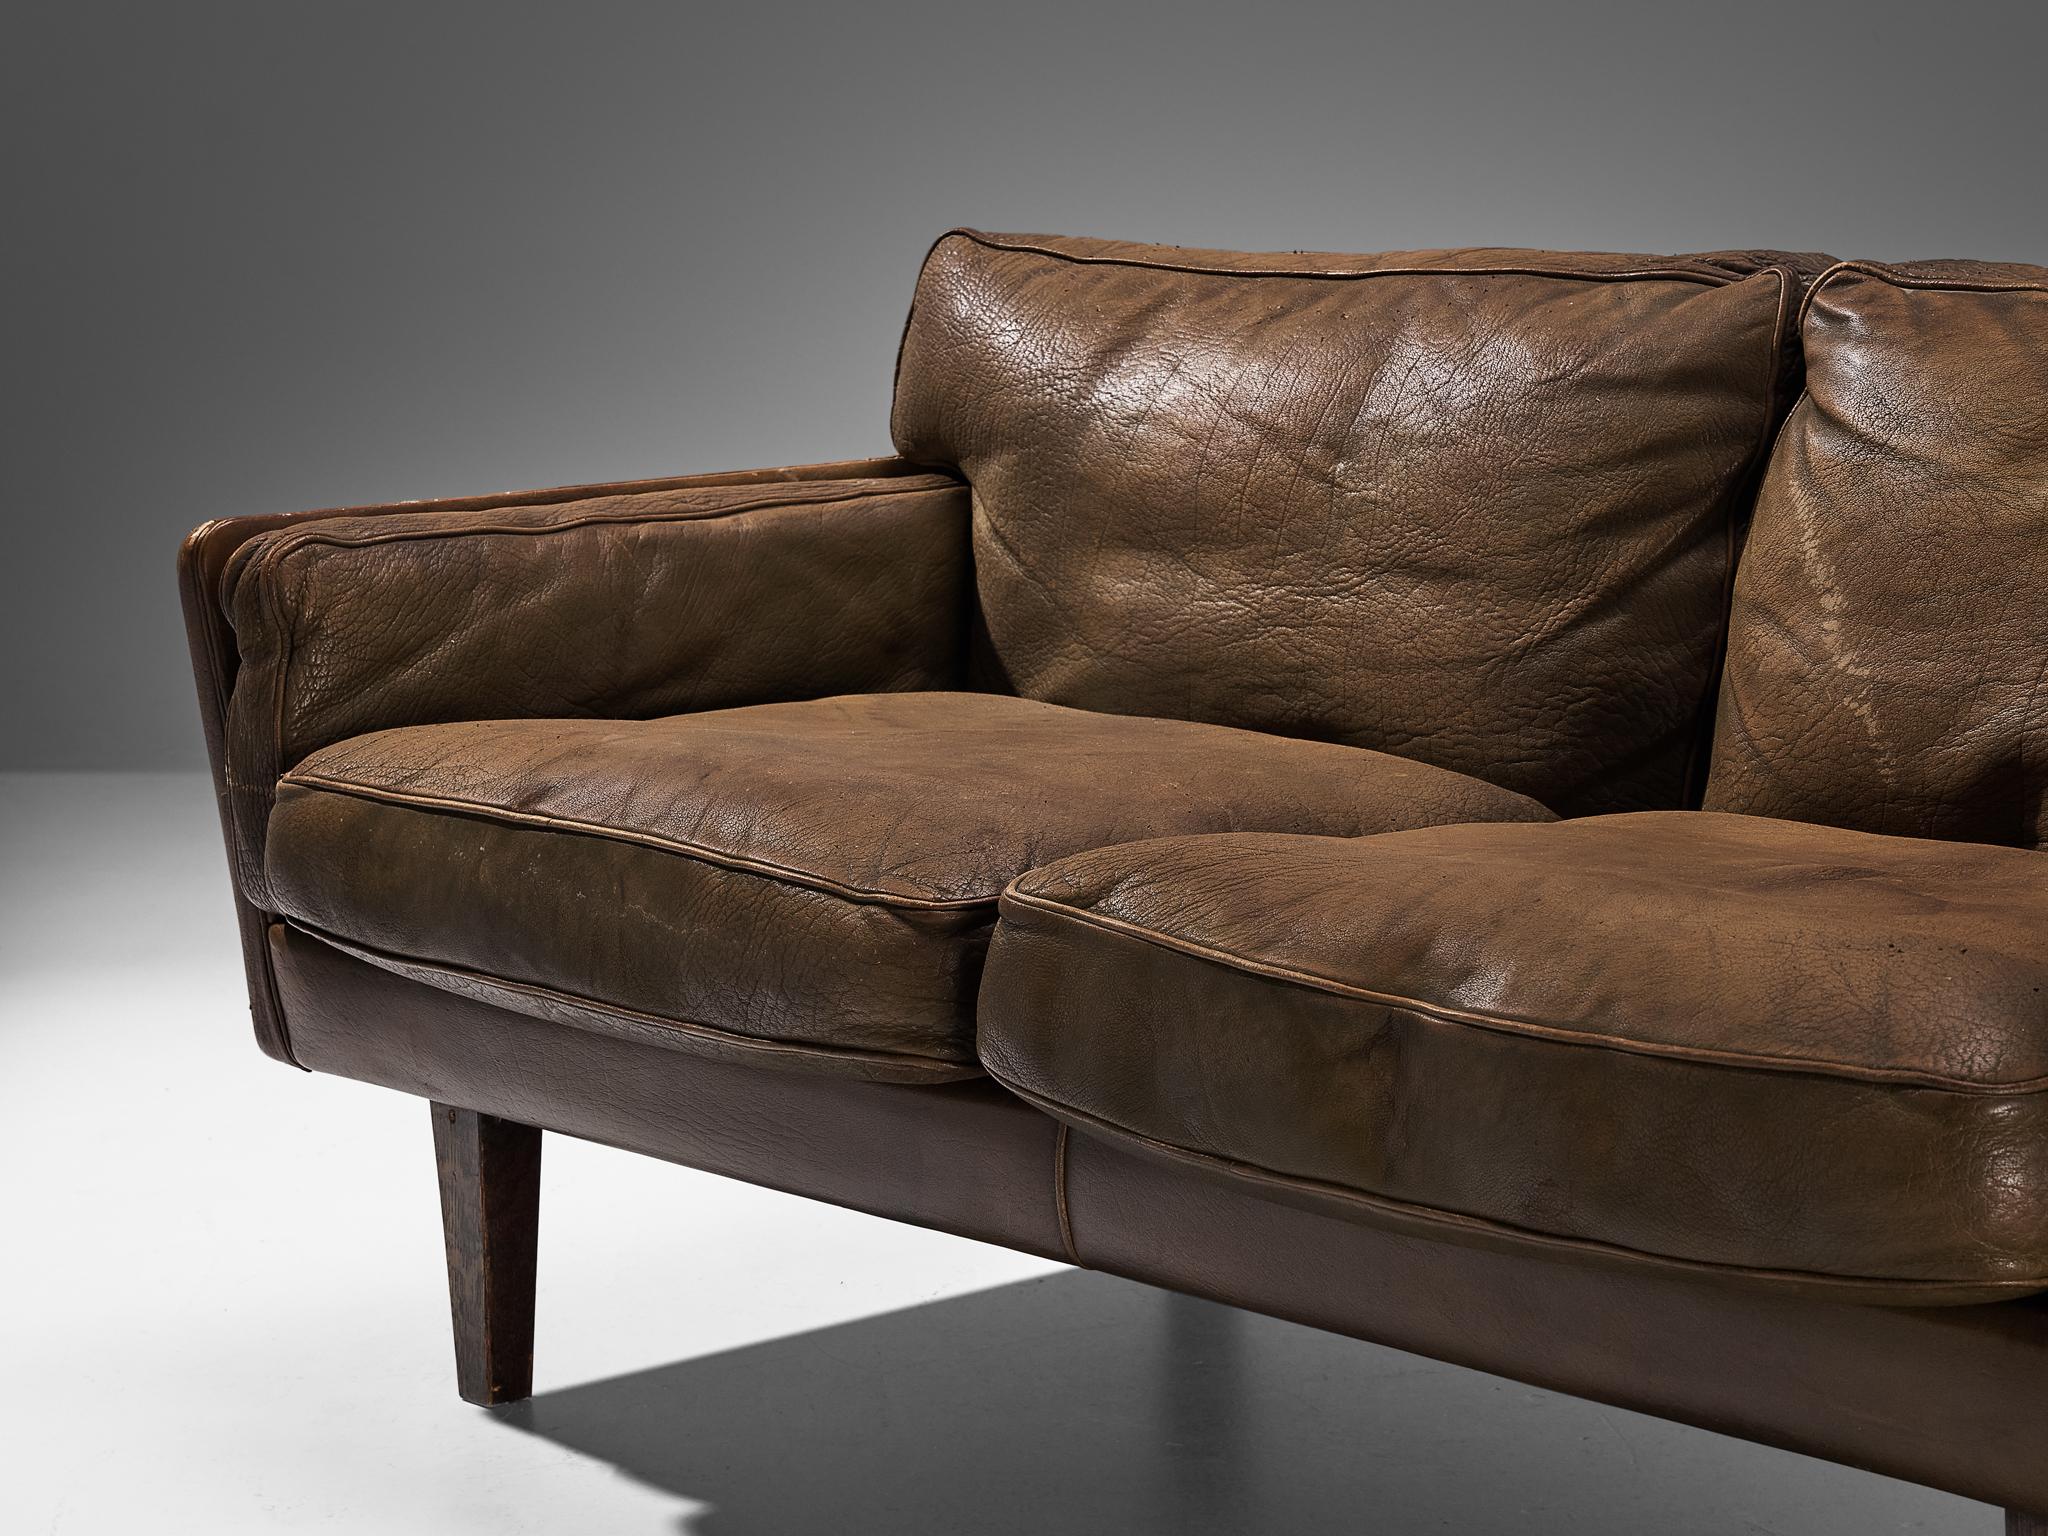 Mid-20th Century Danish Two-Seat Sofa in Brown Leather